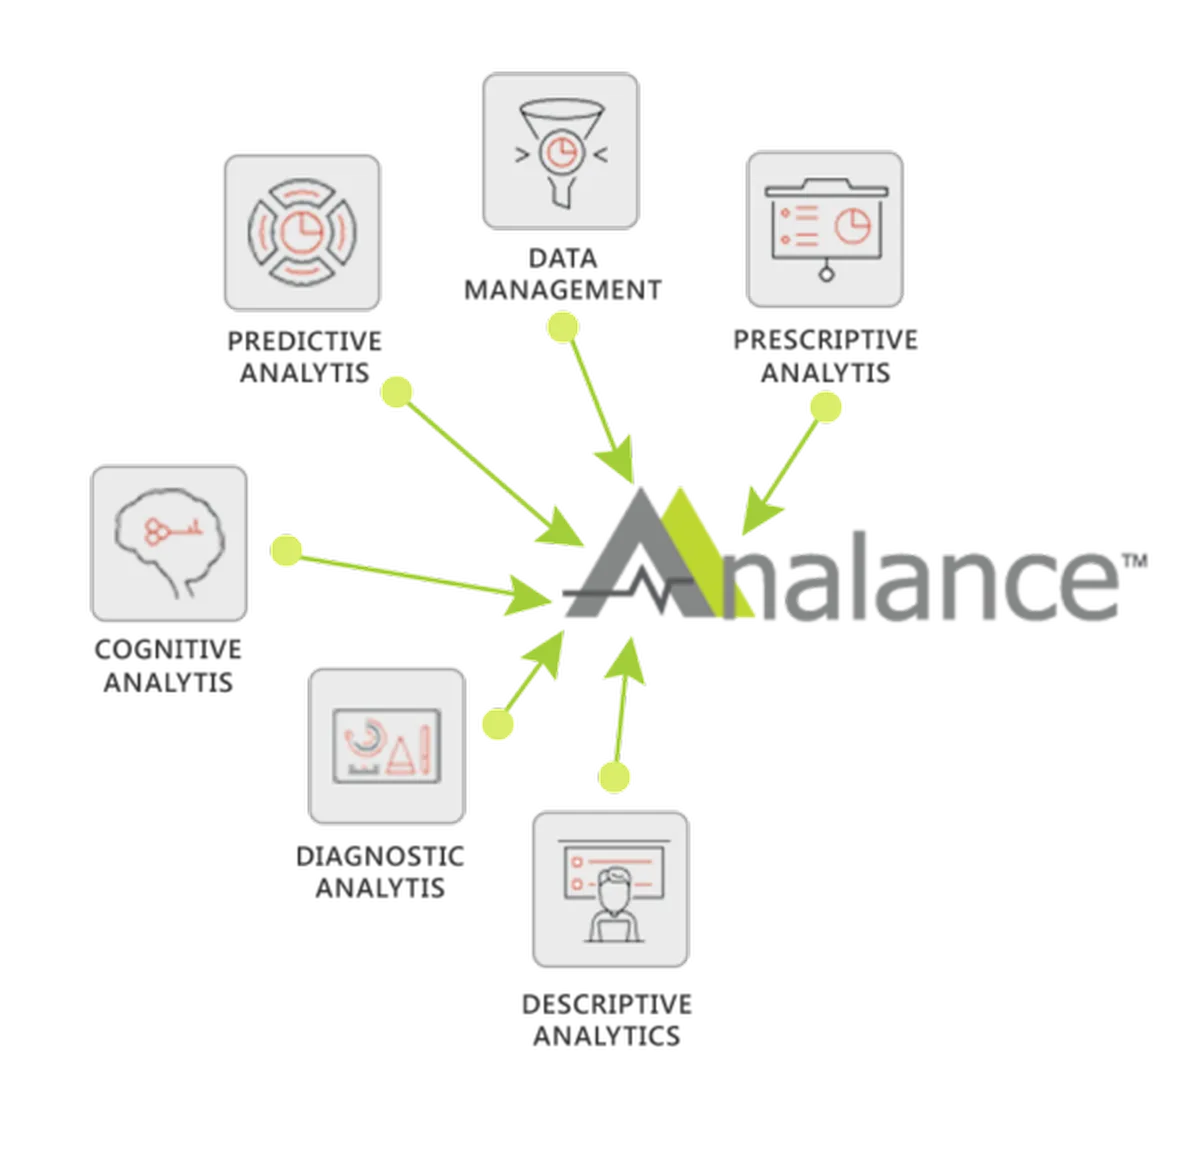 Analance Business Intelligence Suite Features